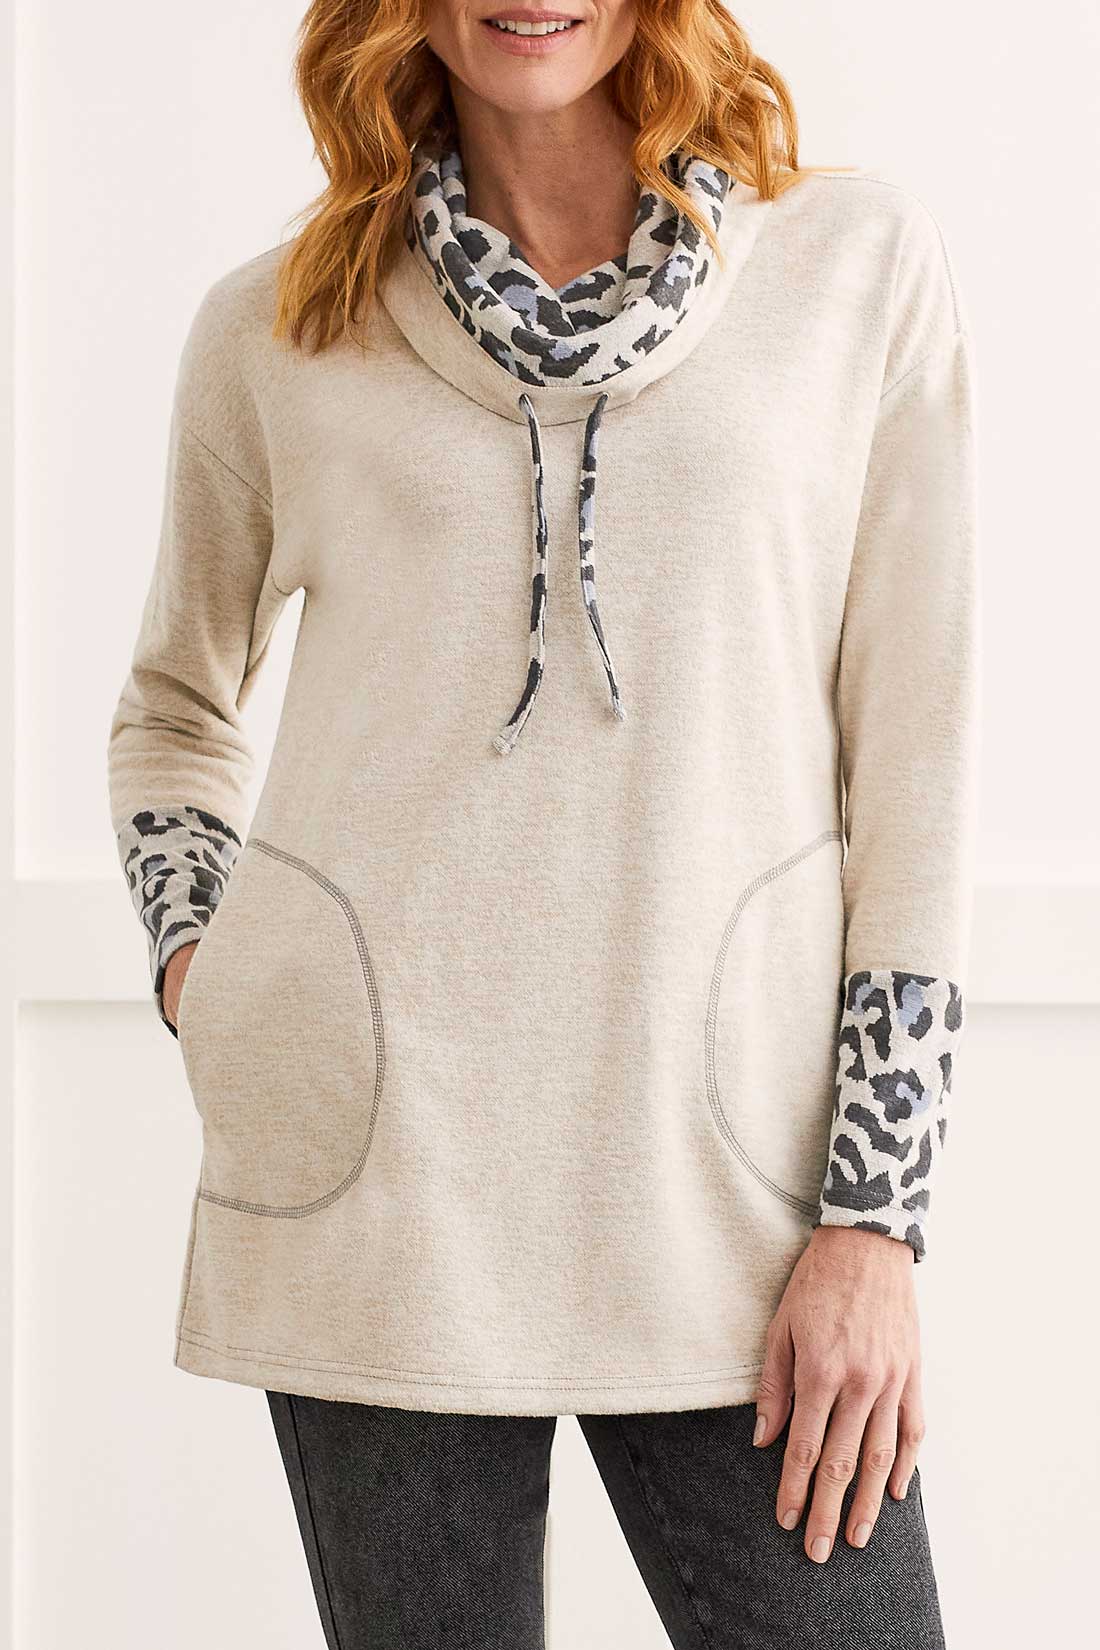 Cowl Neck Tunic with Leopard Trim by Tribal